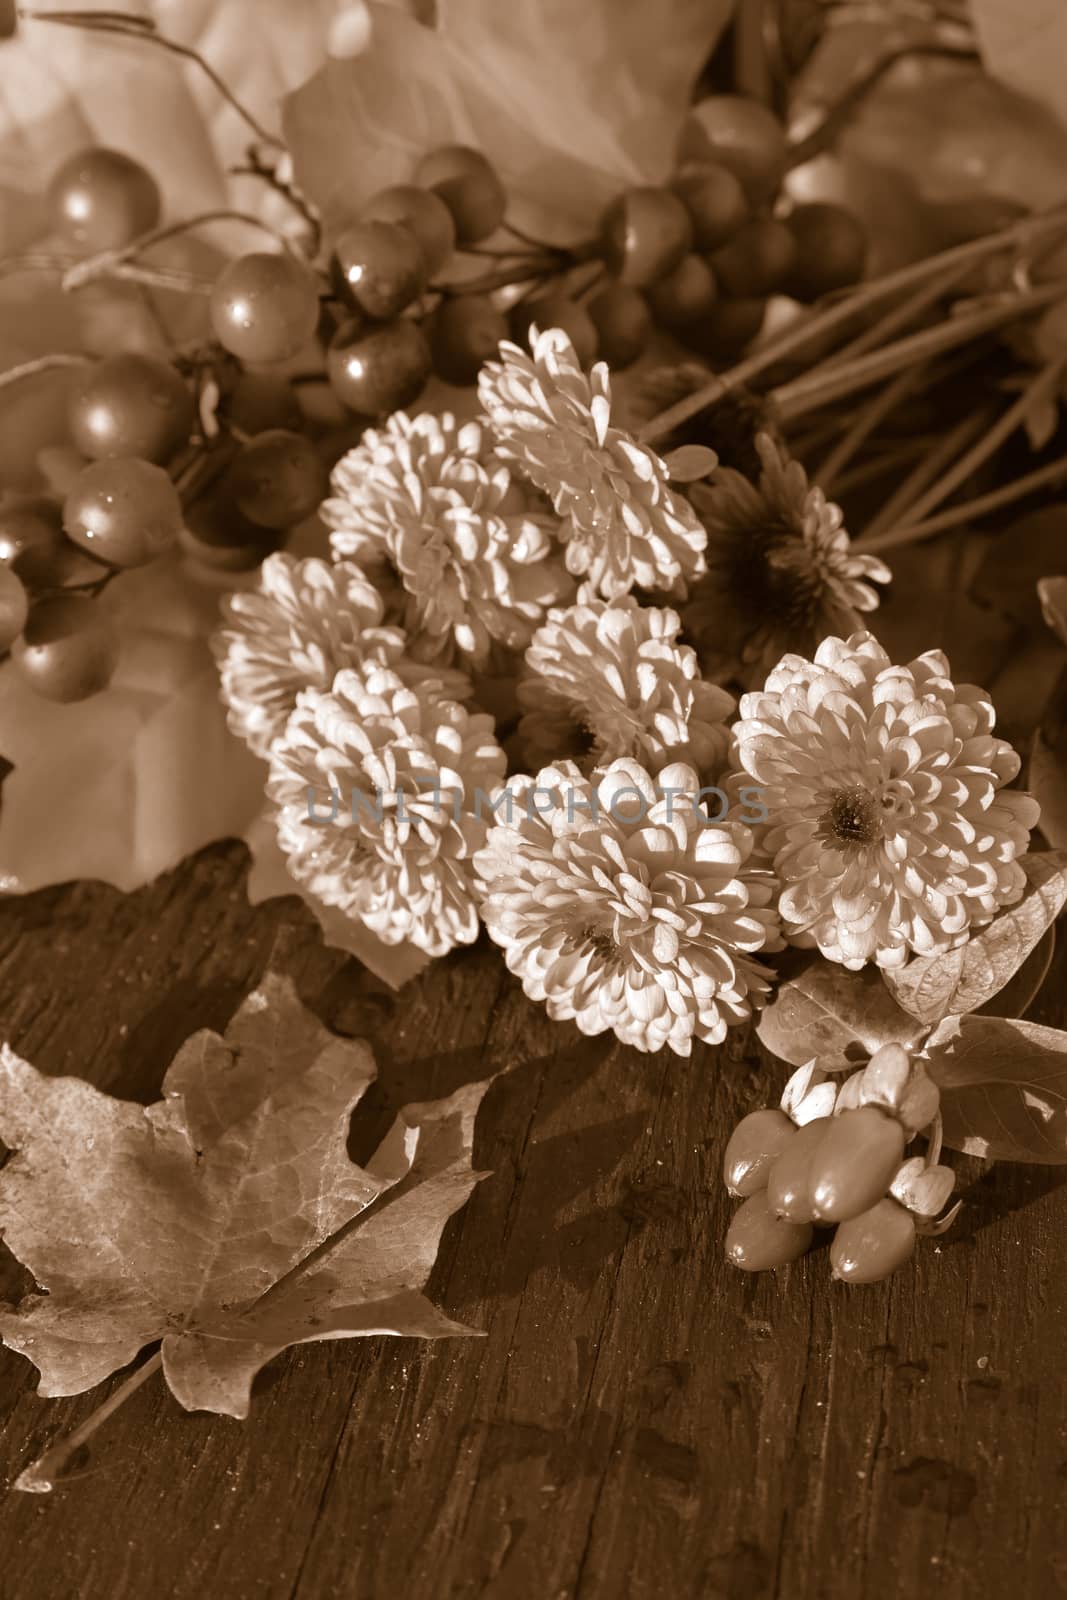 Fall flowers in sepia tone by gvictoria